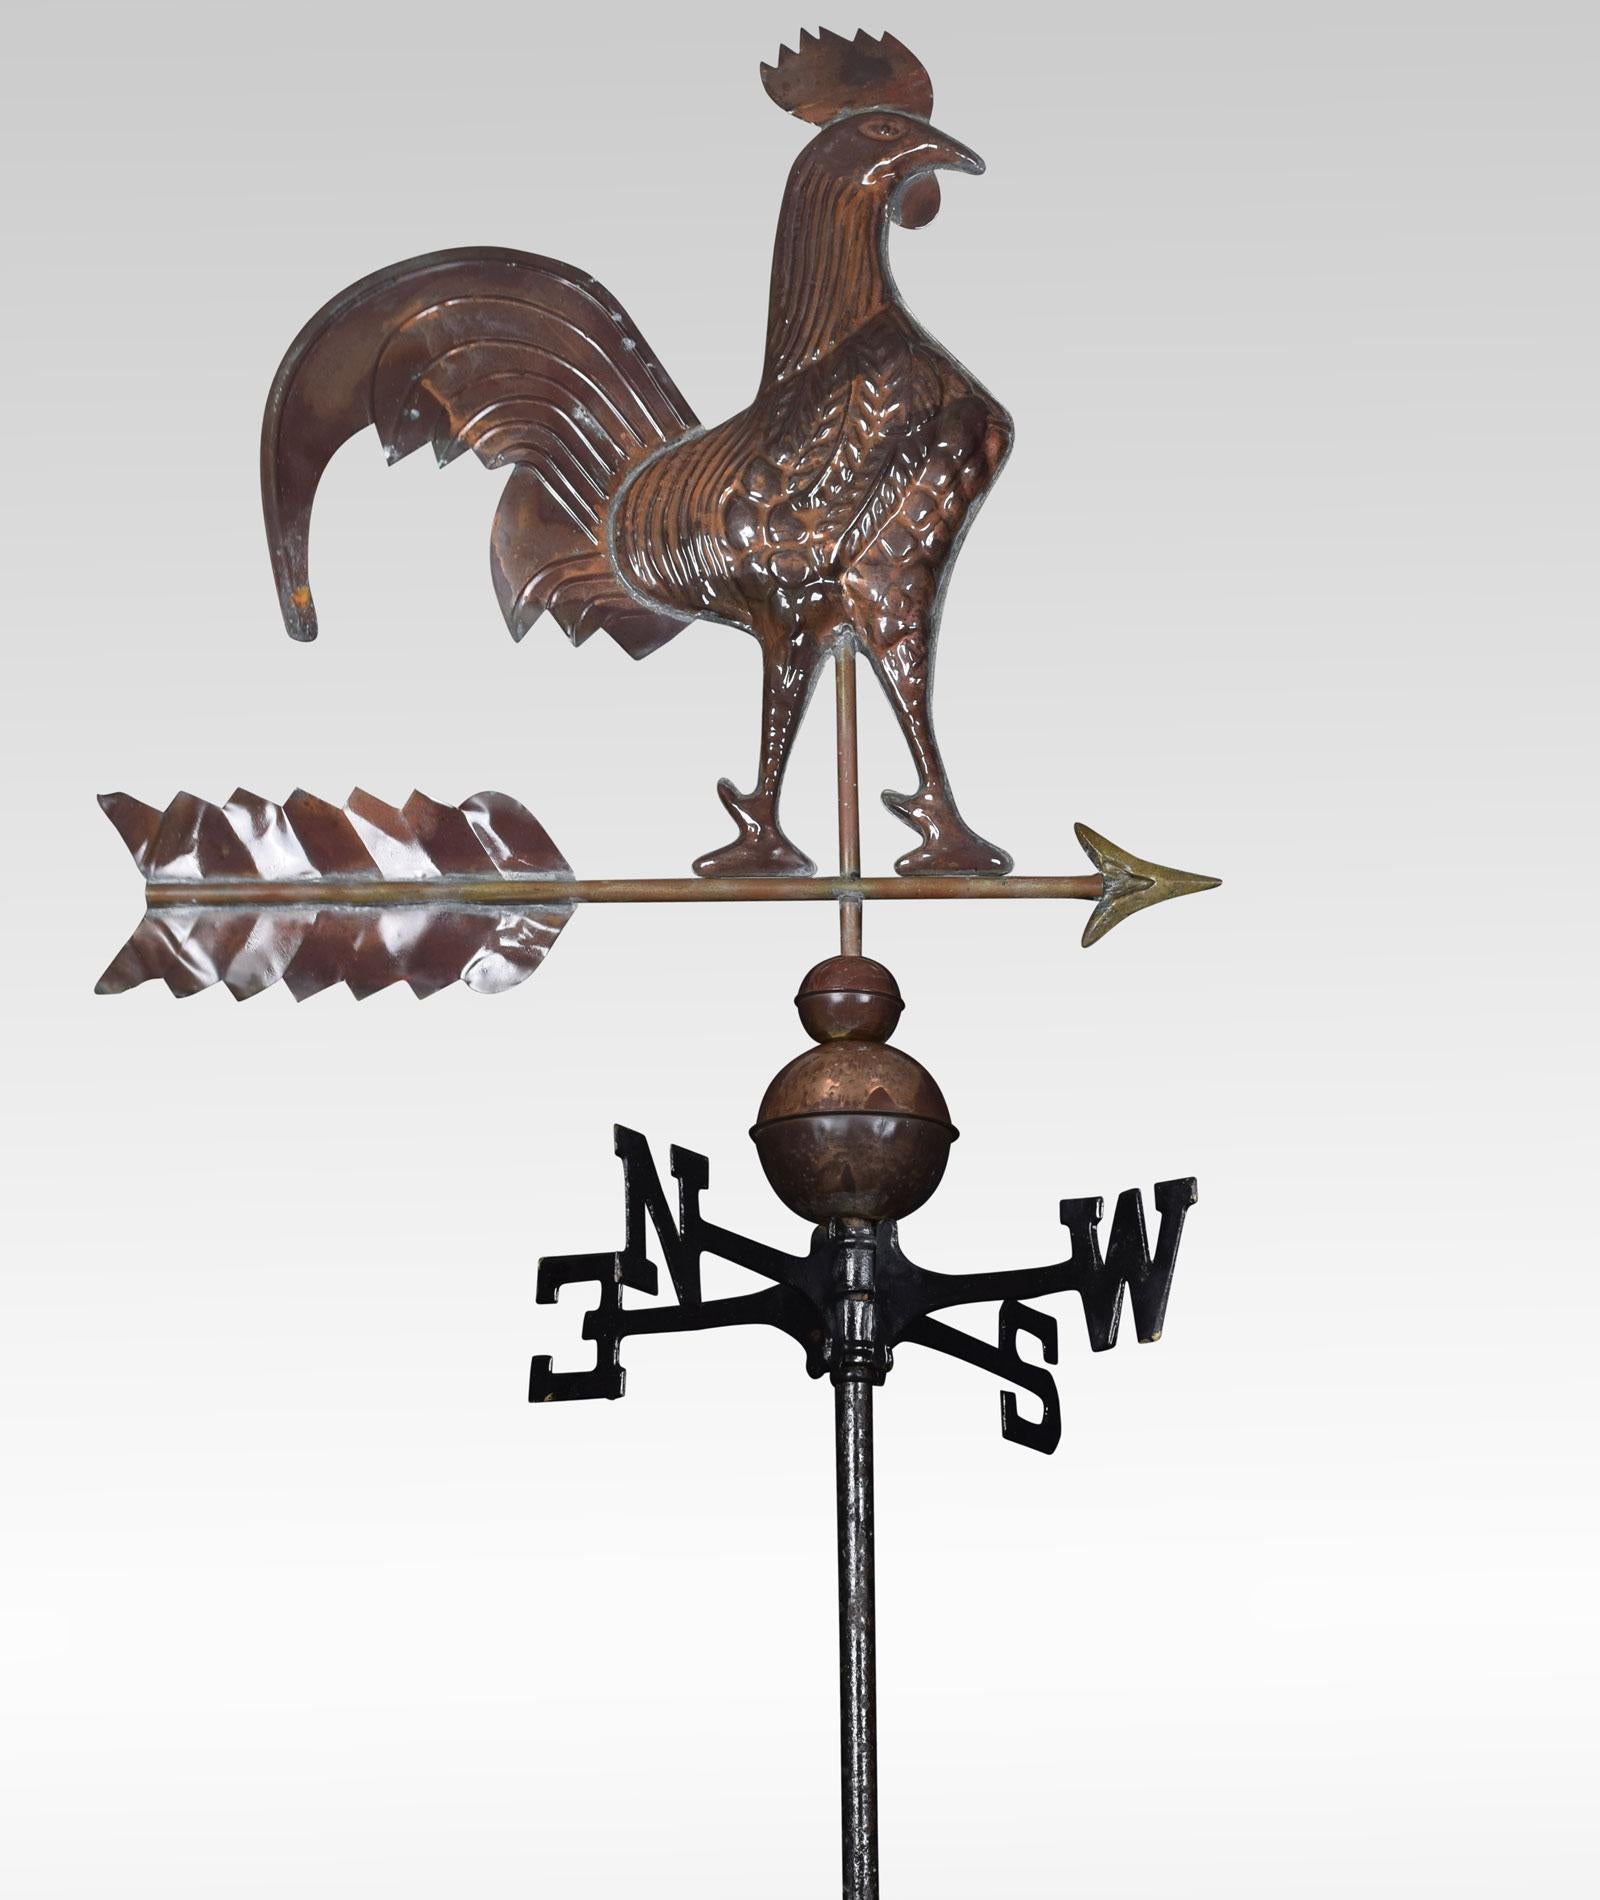 The traditional weather vane features a Classic swivel French rooster standing on an arrow; below, the four points of the compass which swivel according to wind direction.
Dimensions
Height 54 inches
Width 24 inches
Depth 24 inches.